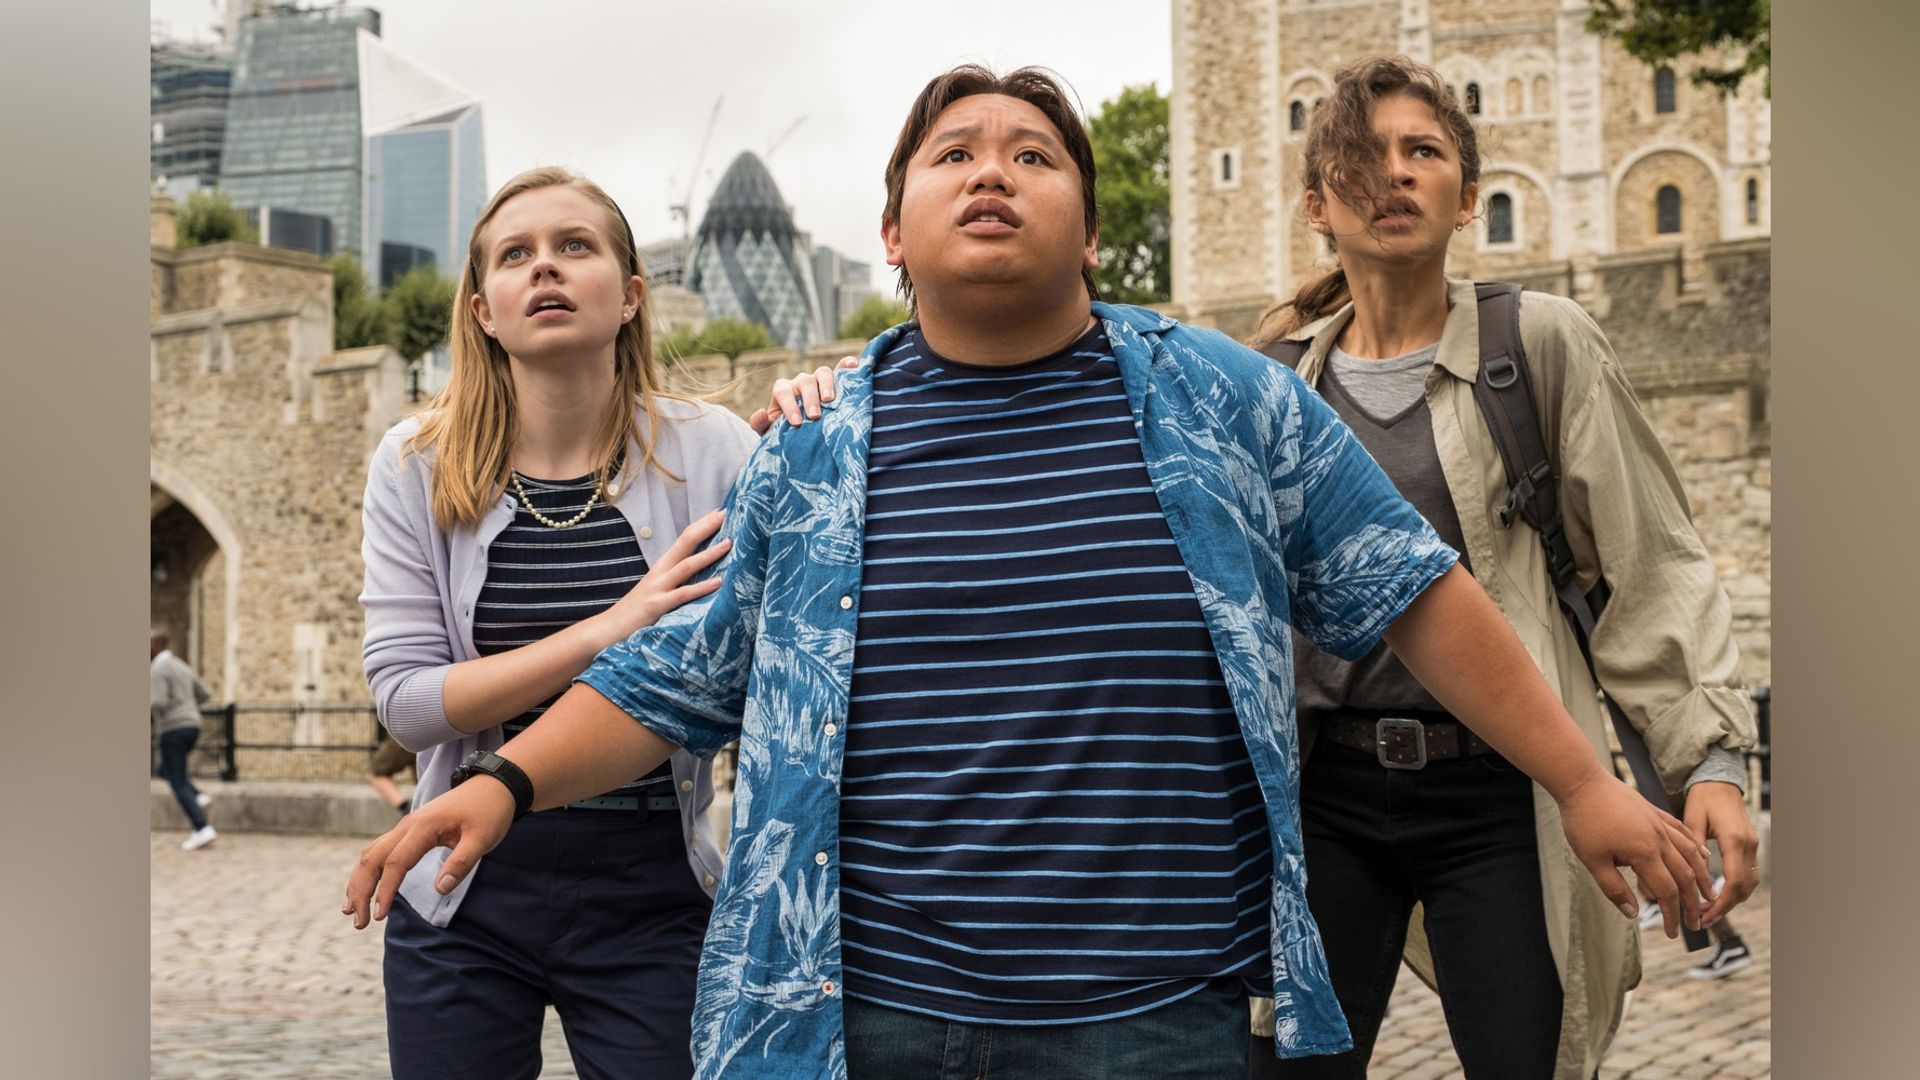 Jacob Batalon in the movie Spider-Man: Far From Home